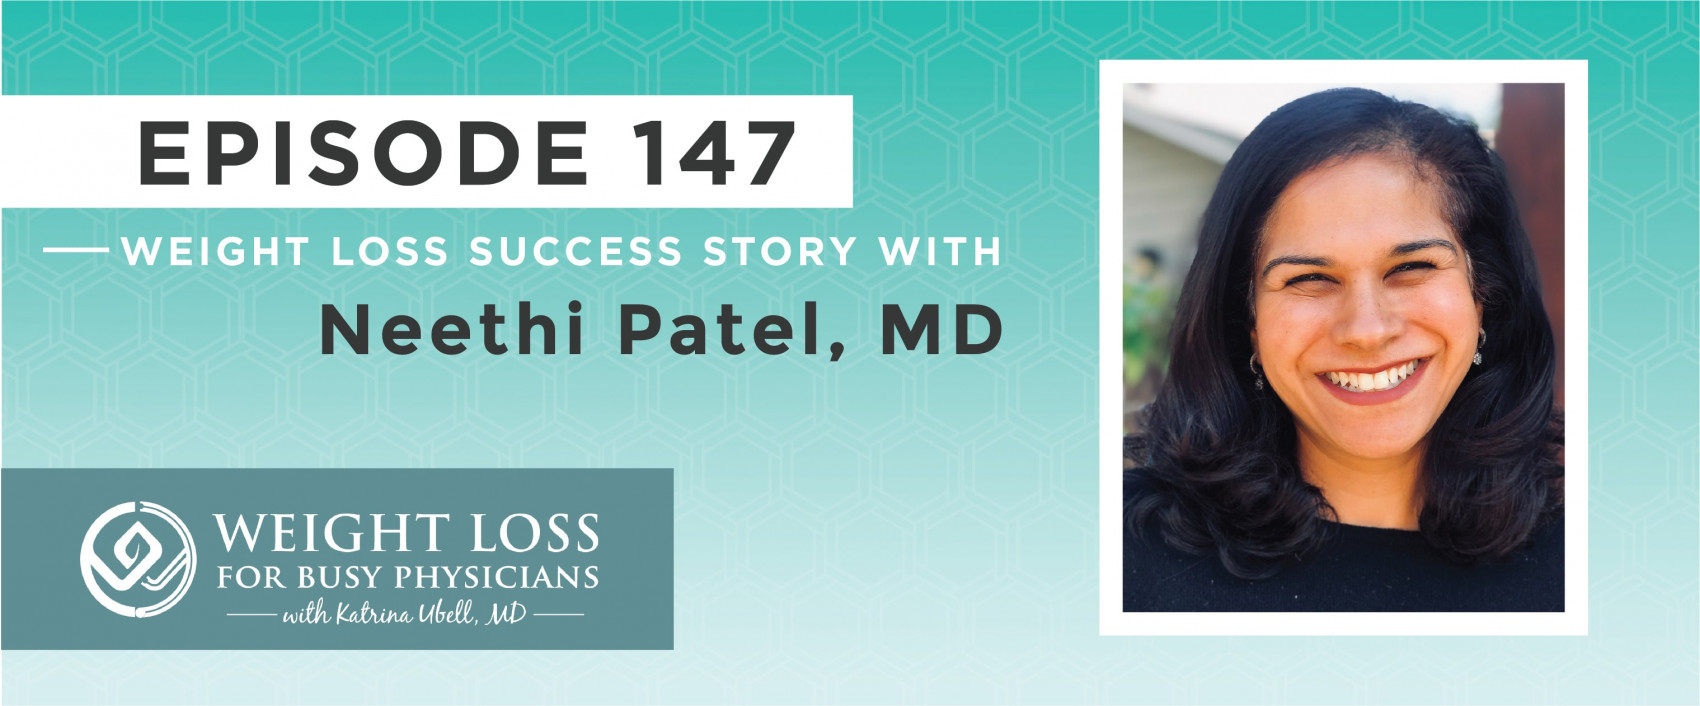 Ep #147: Weight Loss Success Story with Neethi Patel, MD